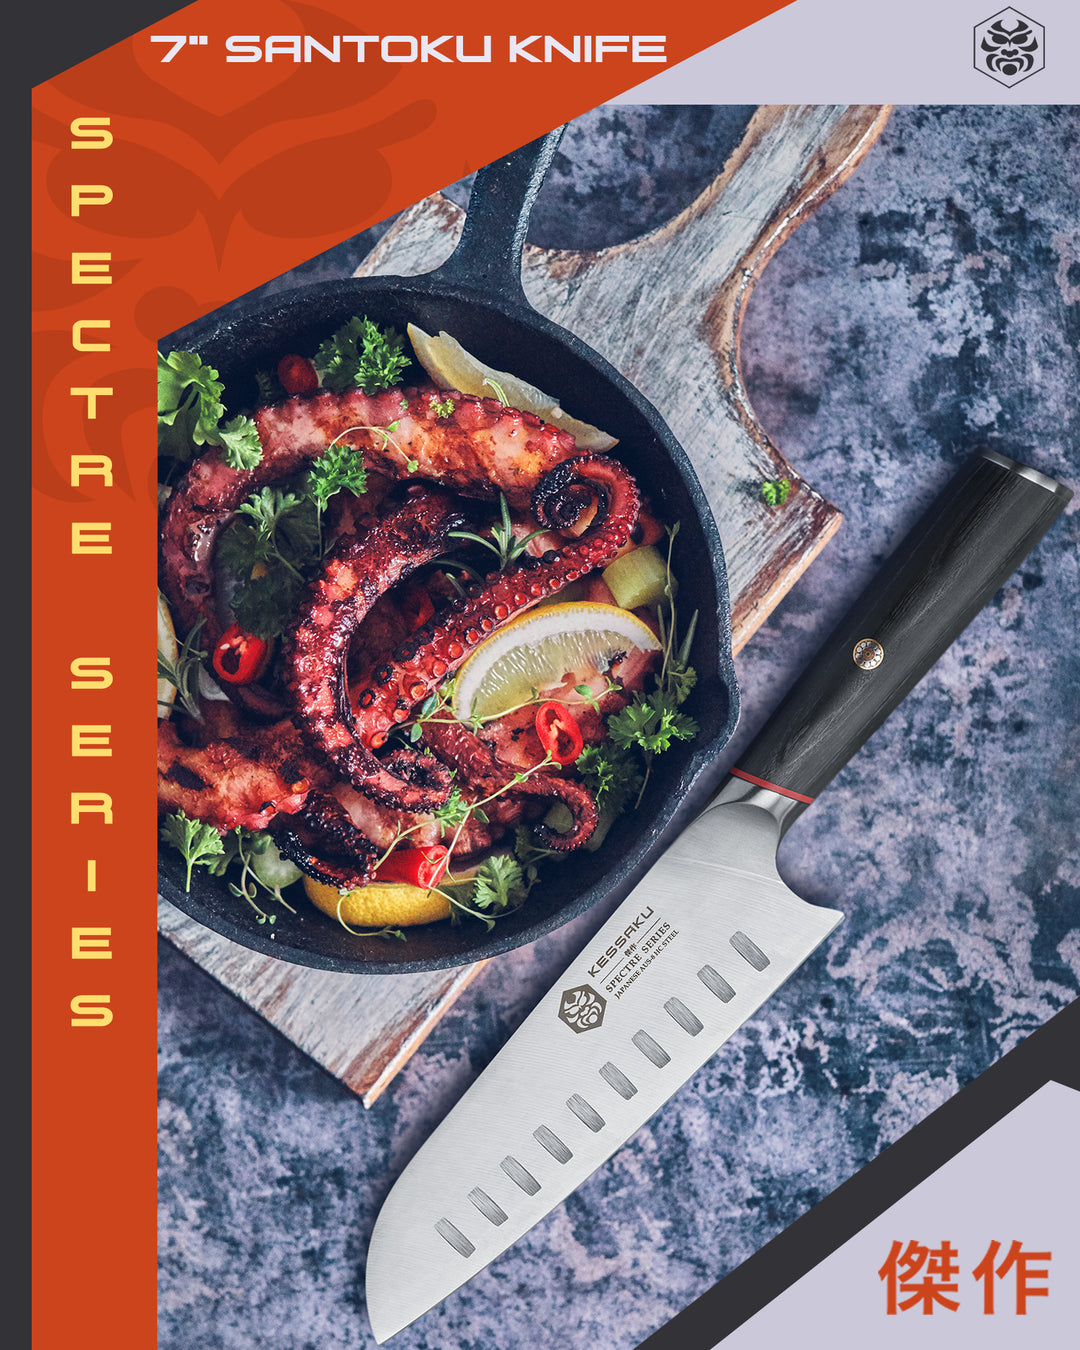 The Spectre Santoku Knife with grilled octopus, lemon wedges and mixed greens